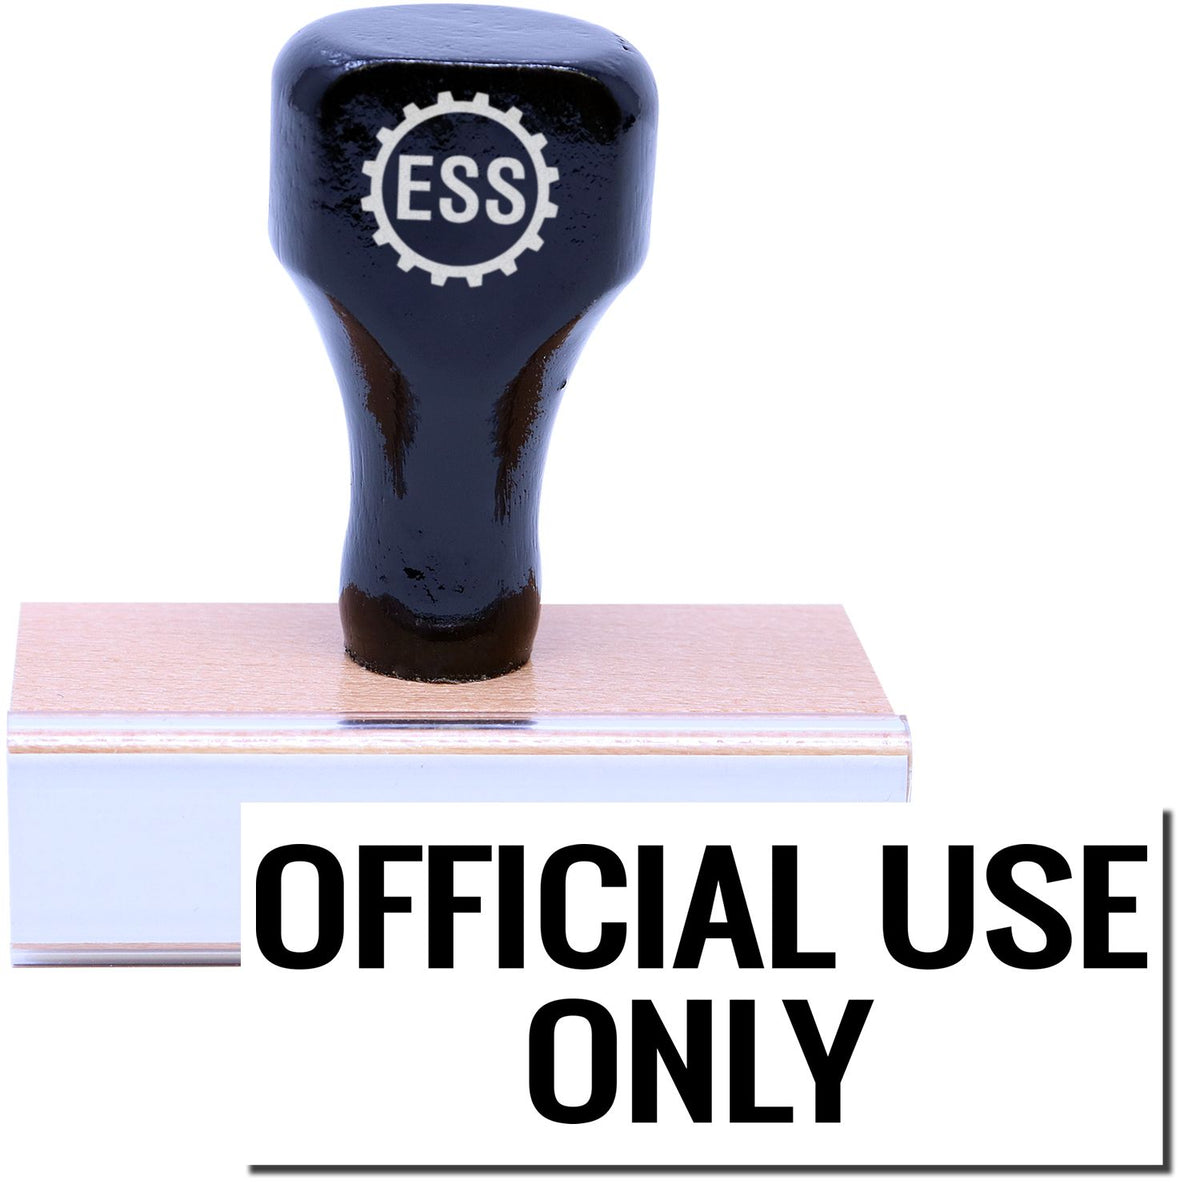 A stock office rubber stamp with a stamped image showing how the text &quot;OFFICIAL USE ONLY&quot; in a large font is displayed after stamping.